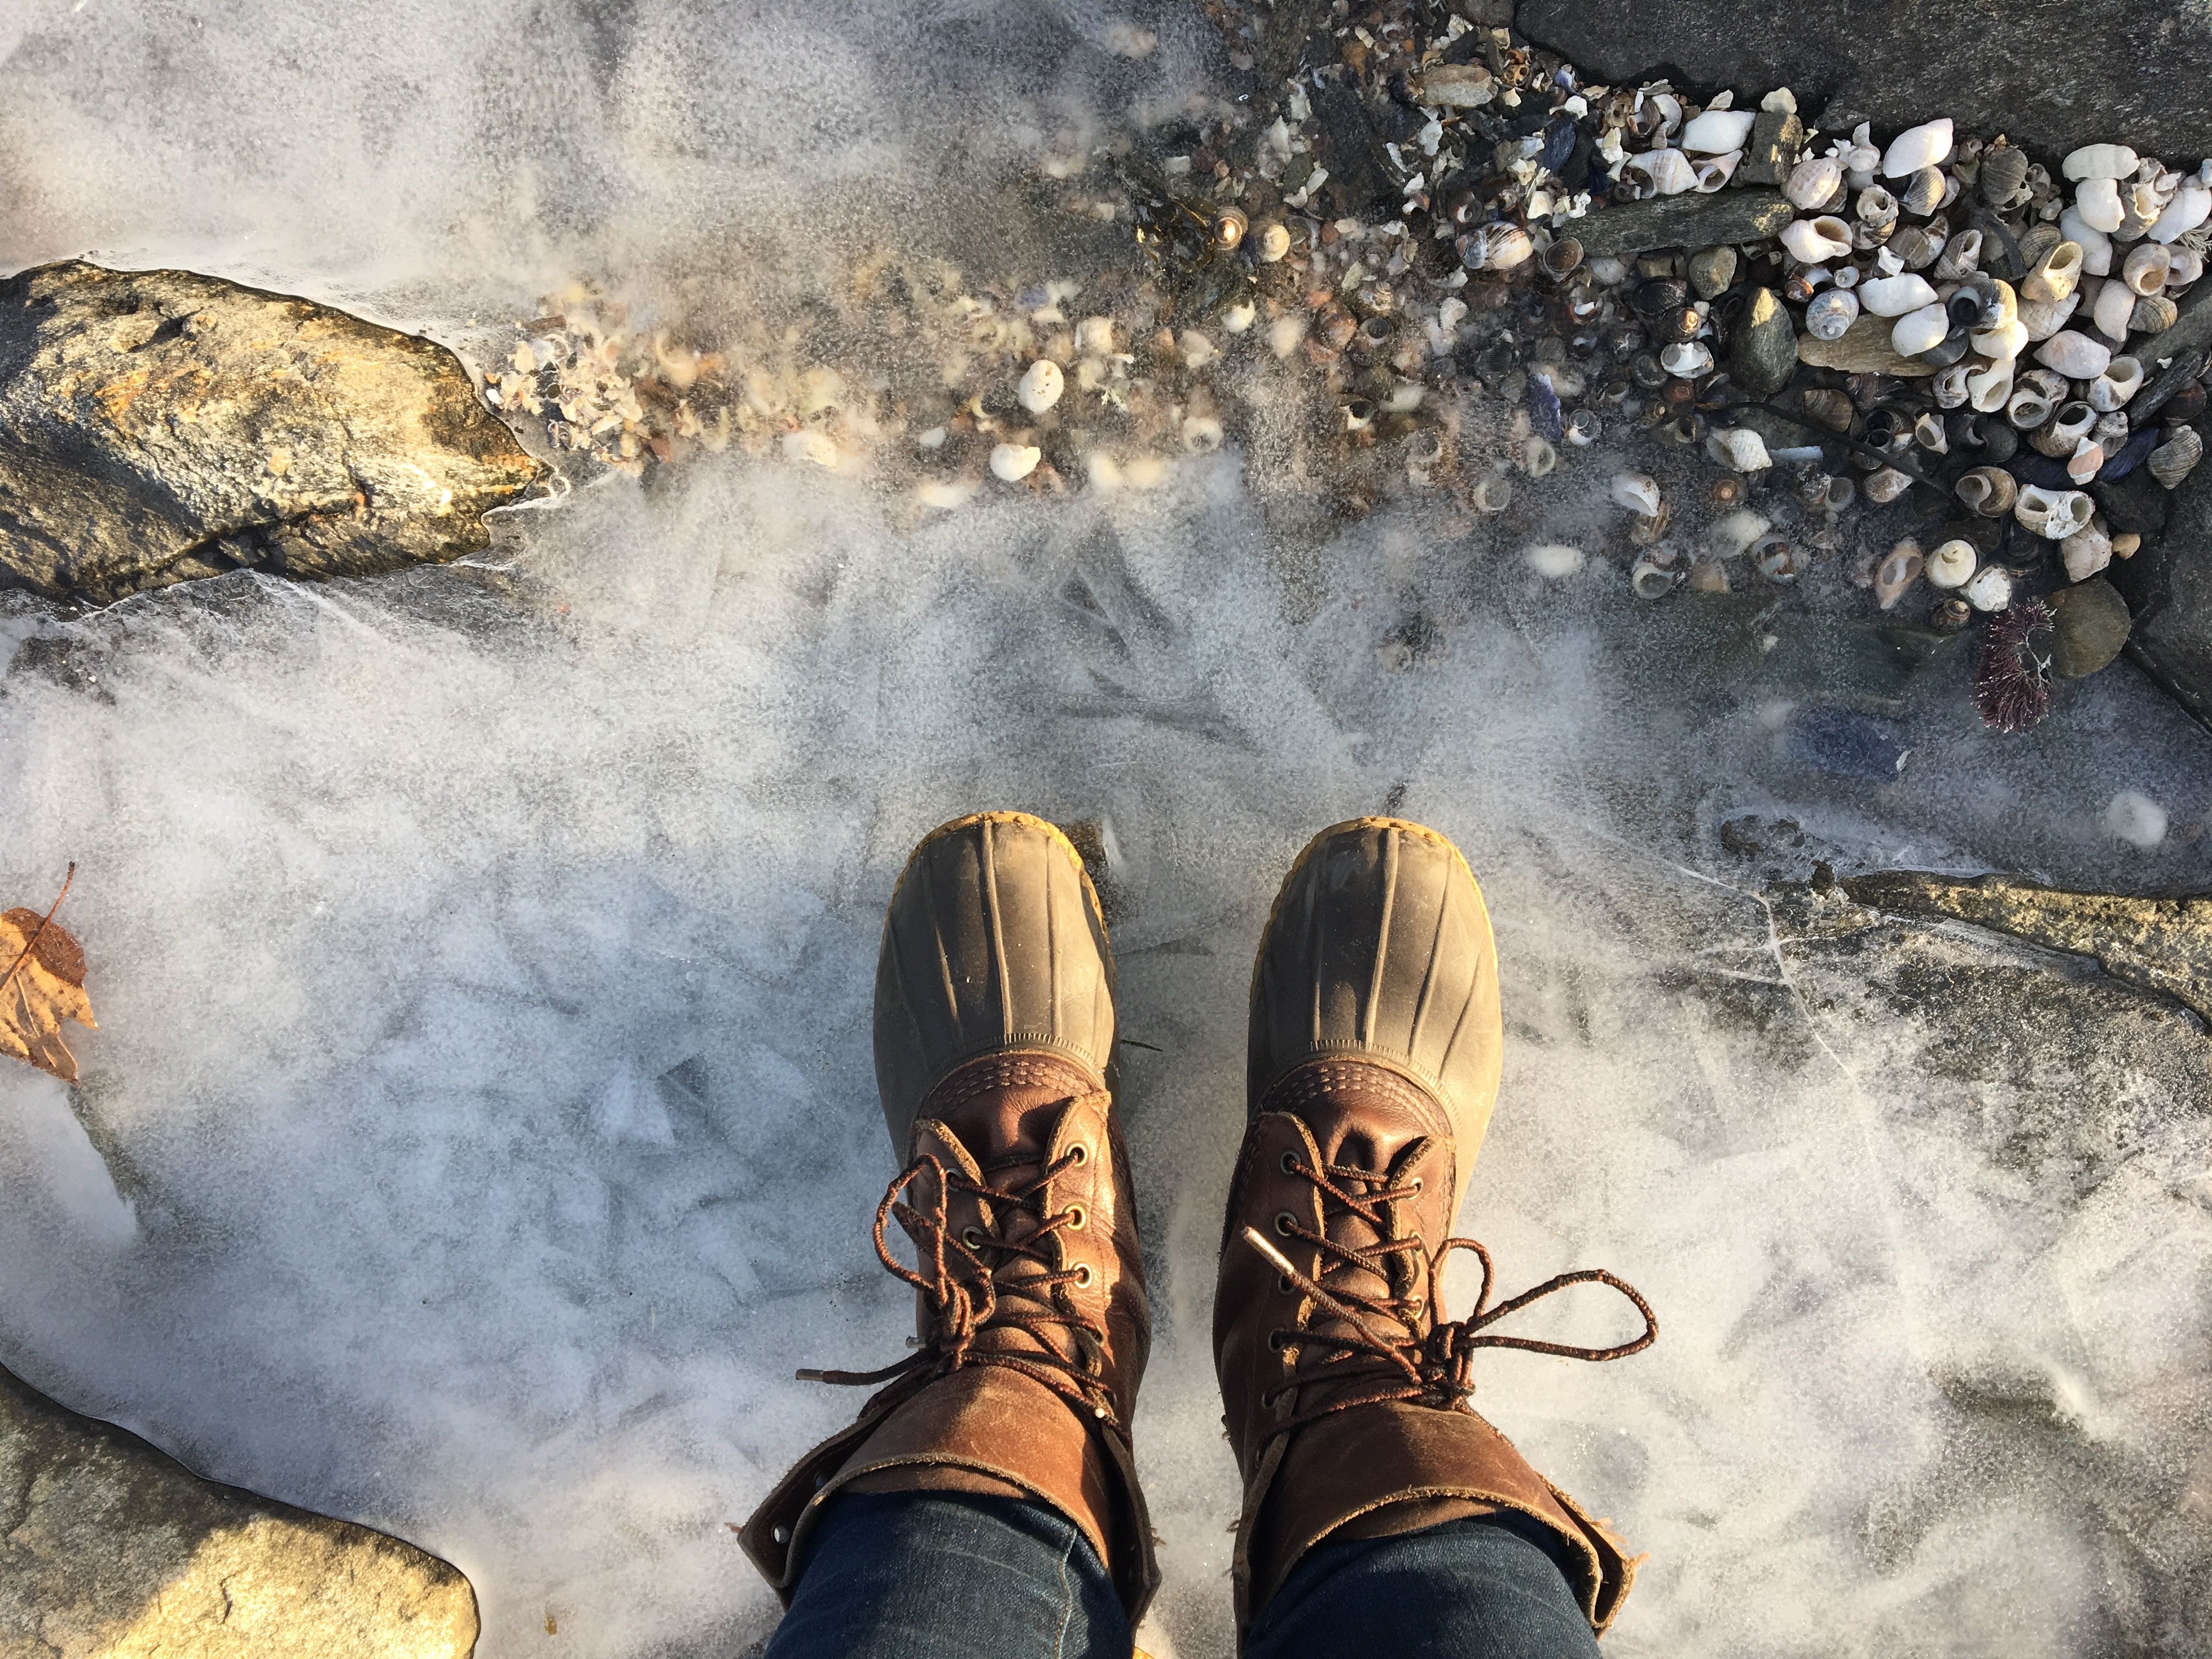 LL Bean winter boots standing on icy ocean water